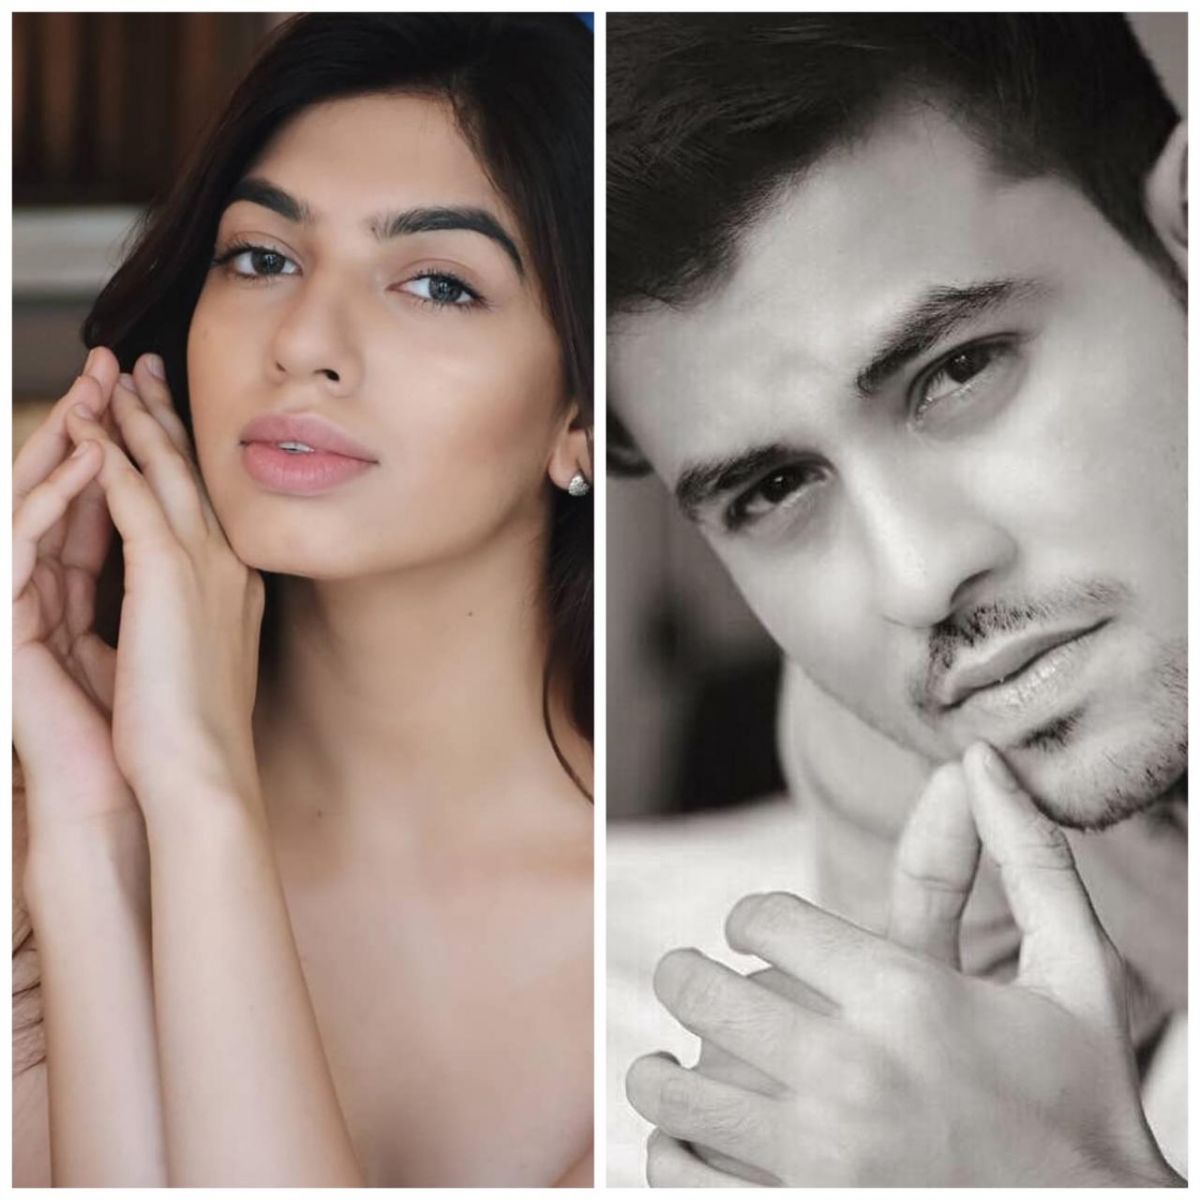 Actors, Siddhant Shah and Nikita Dhongdi - On Being Big in the Entertainment and Media Industry